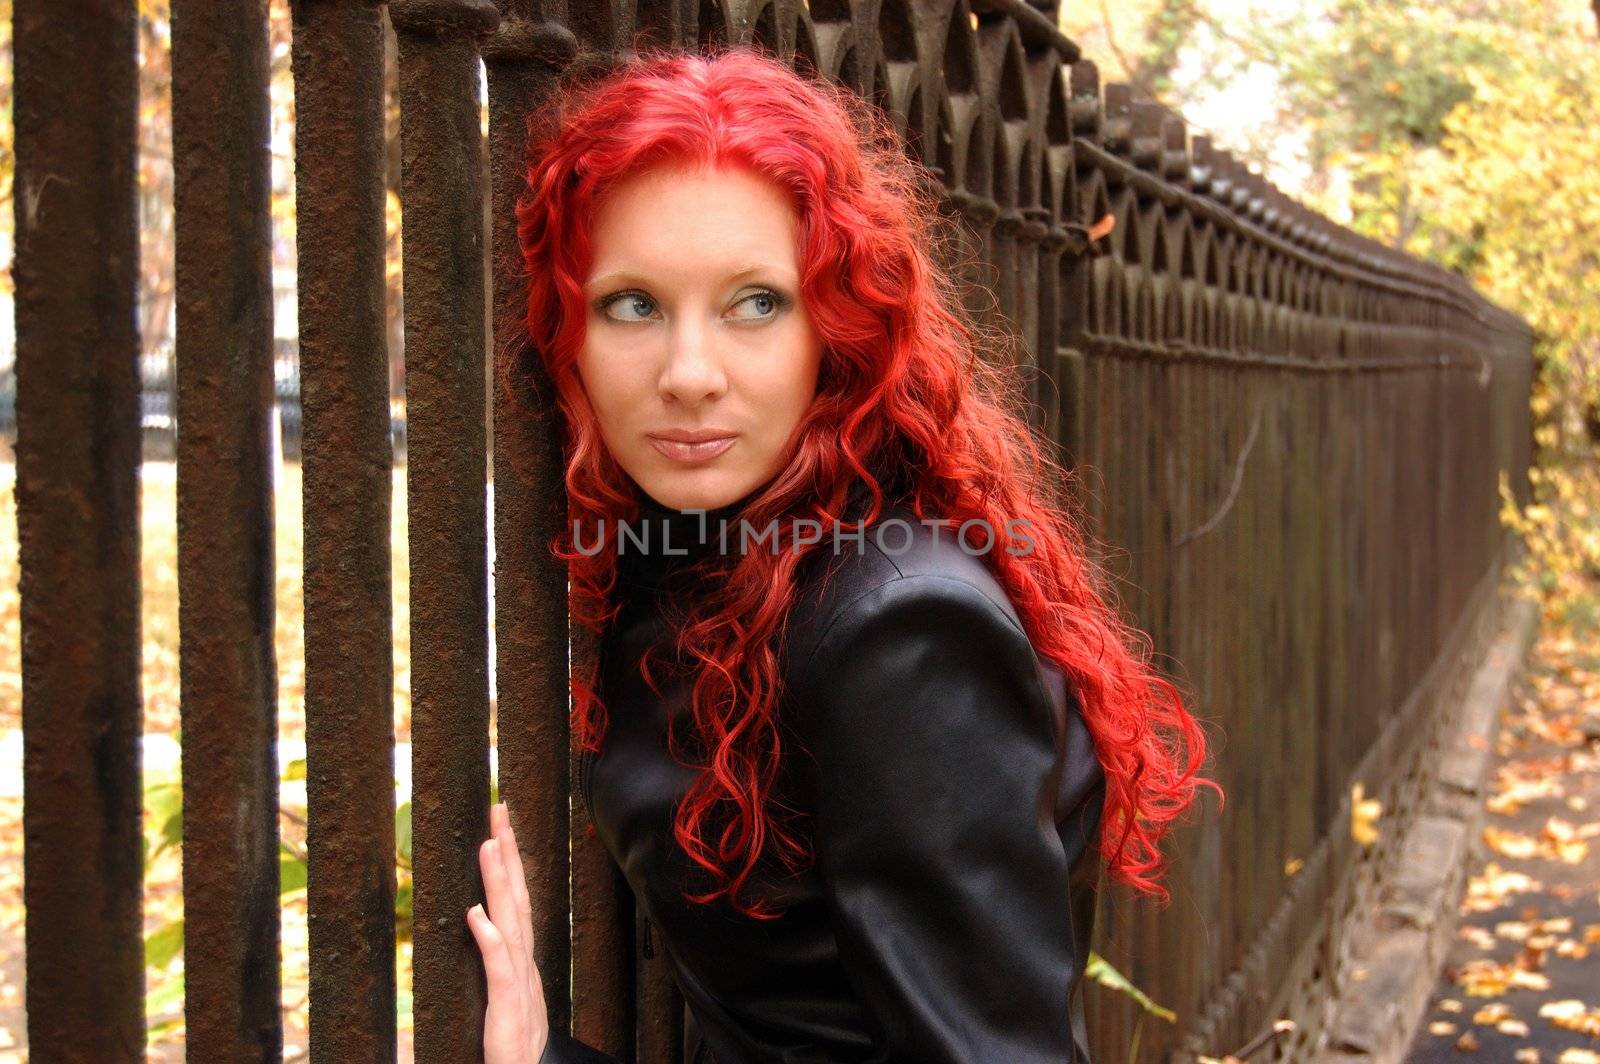 gothic style red hair woman near grate